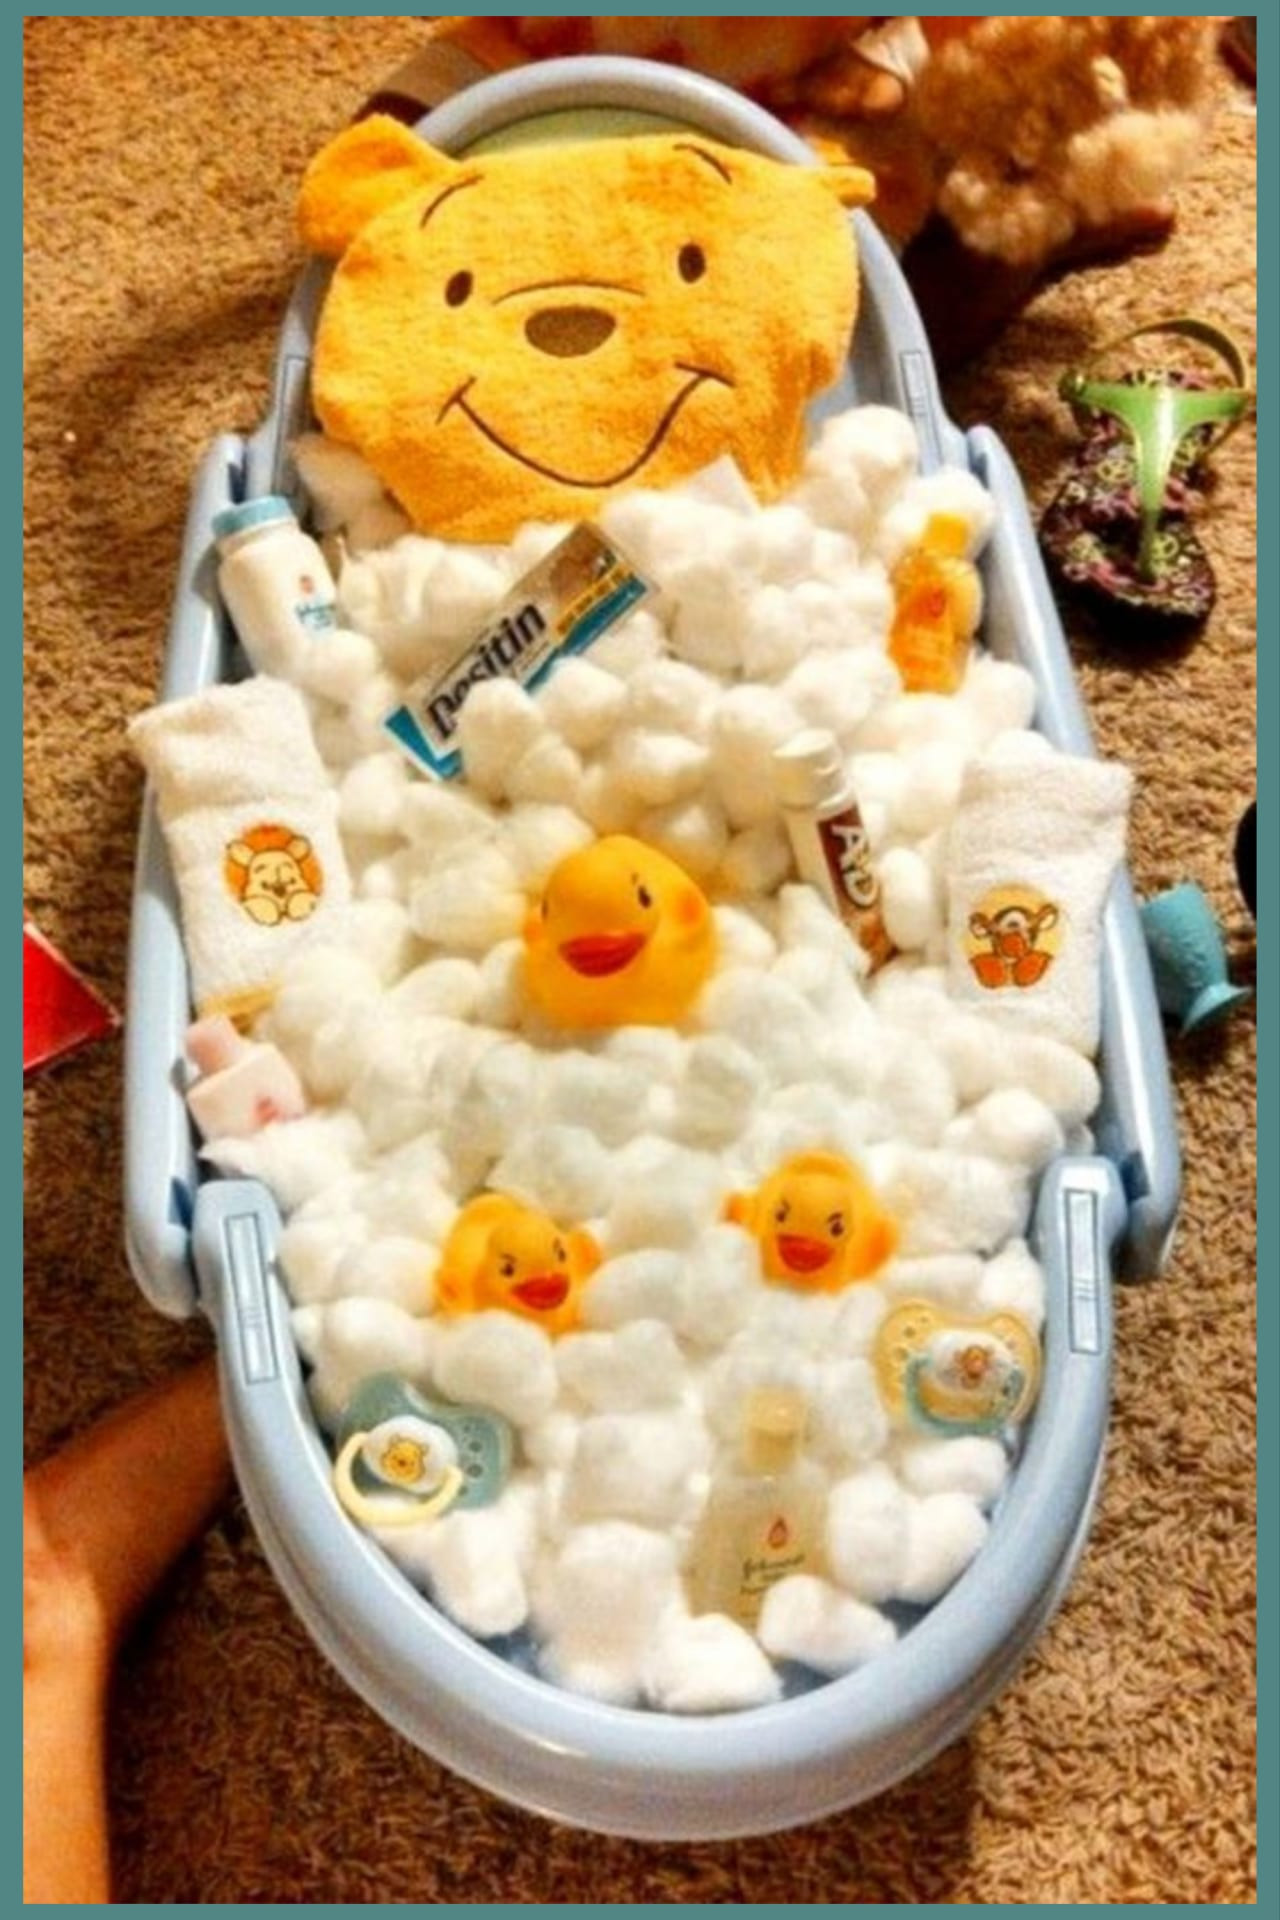 Baby Bath Gift Ideas
 28 Affordable & Cheap Baby Shower Gift Ideas For Those on